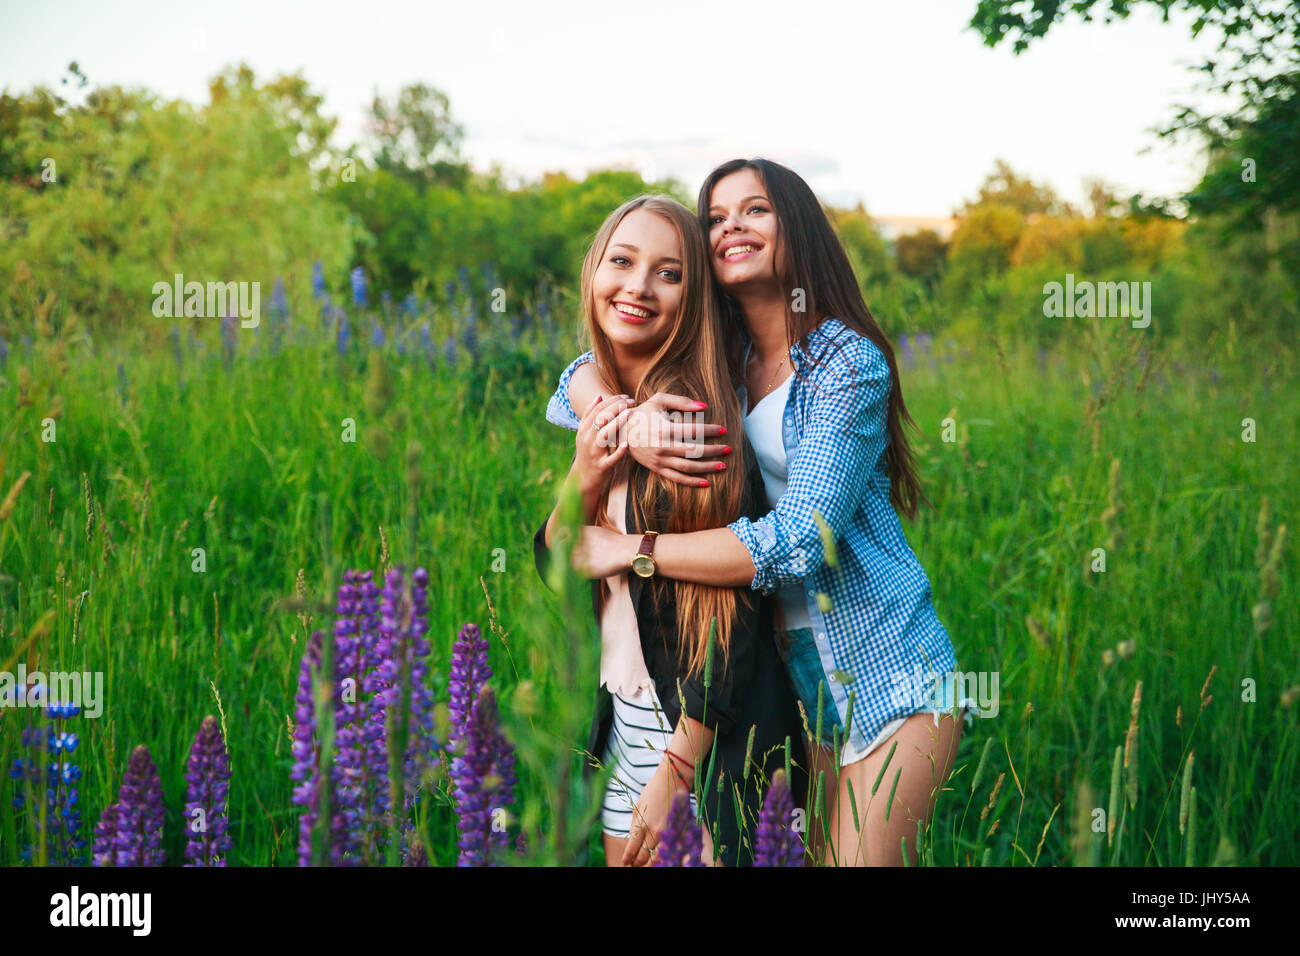 Girlfriends Friendship Happiness Community Concept. Two smiling friends hugging outdoors. Stock Photo